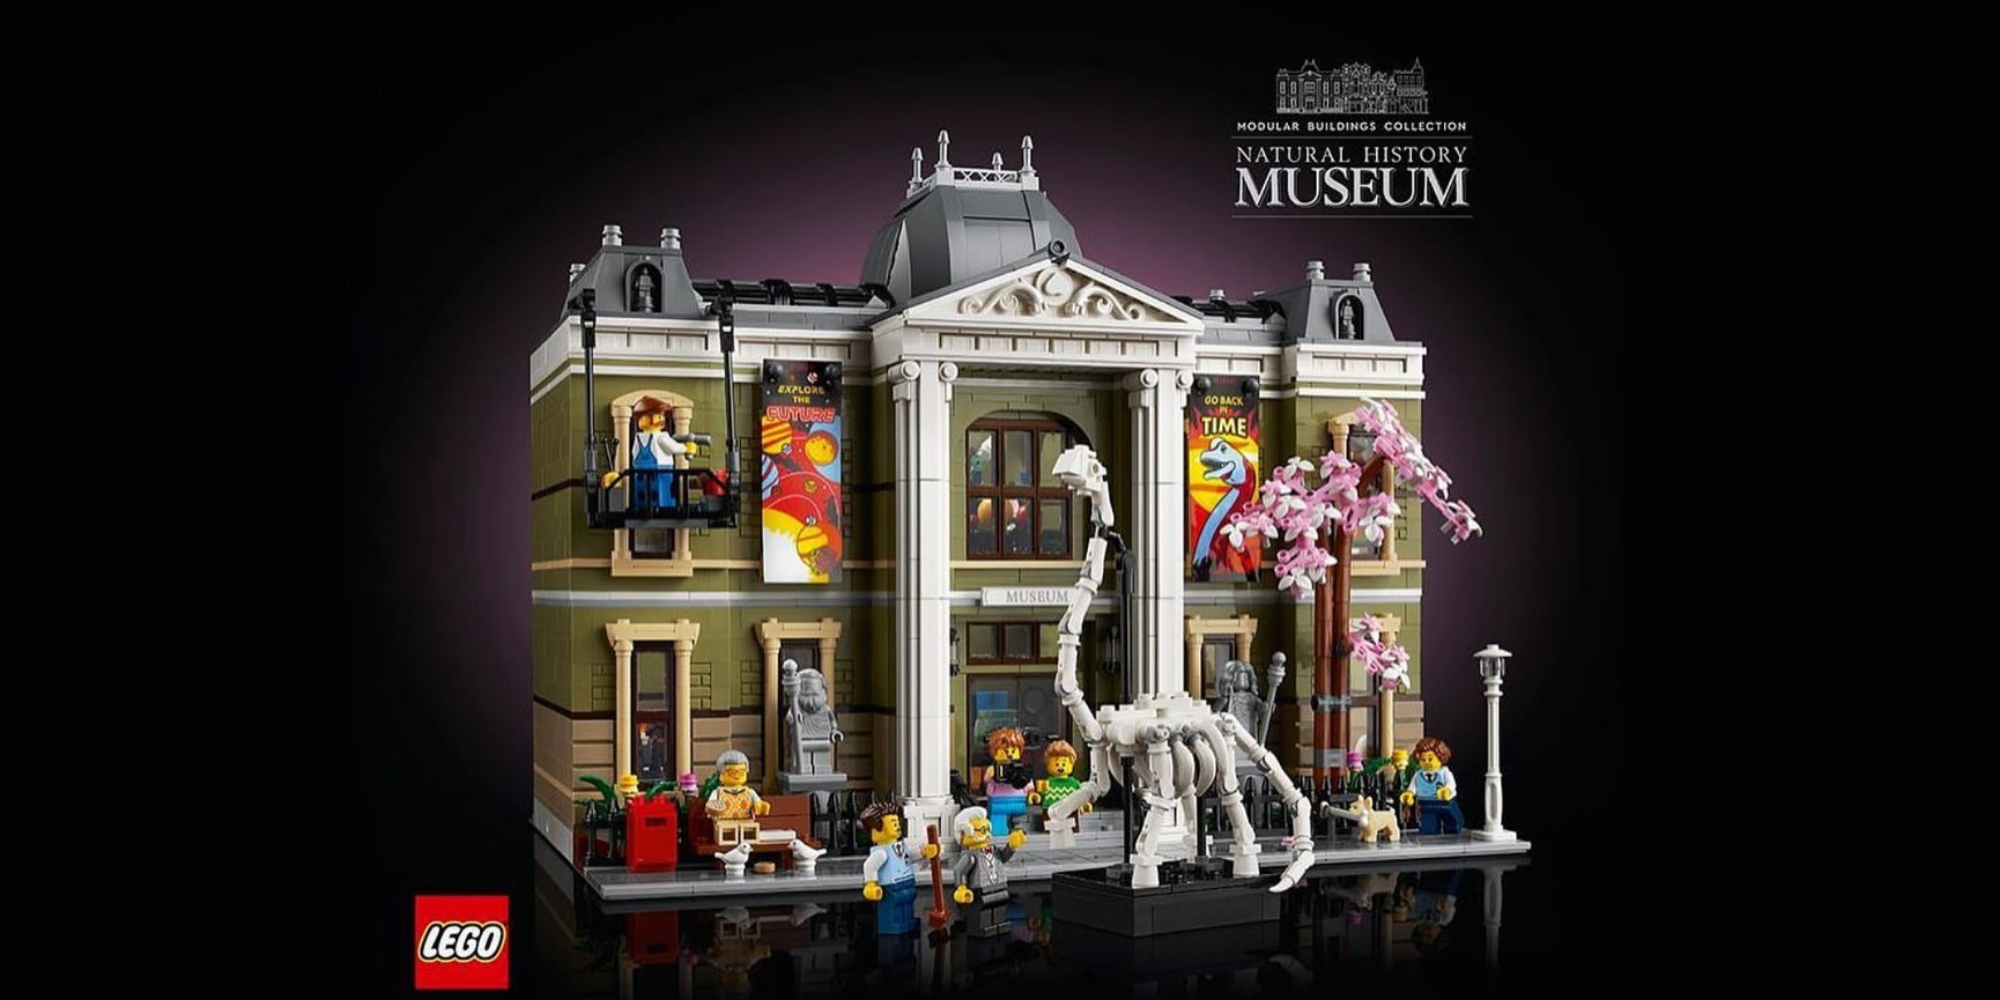 LEGO IDEAS - Night At The Museum